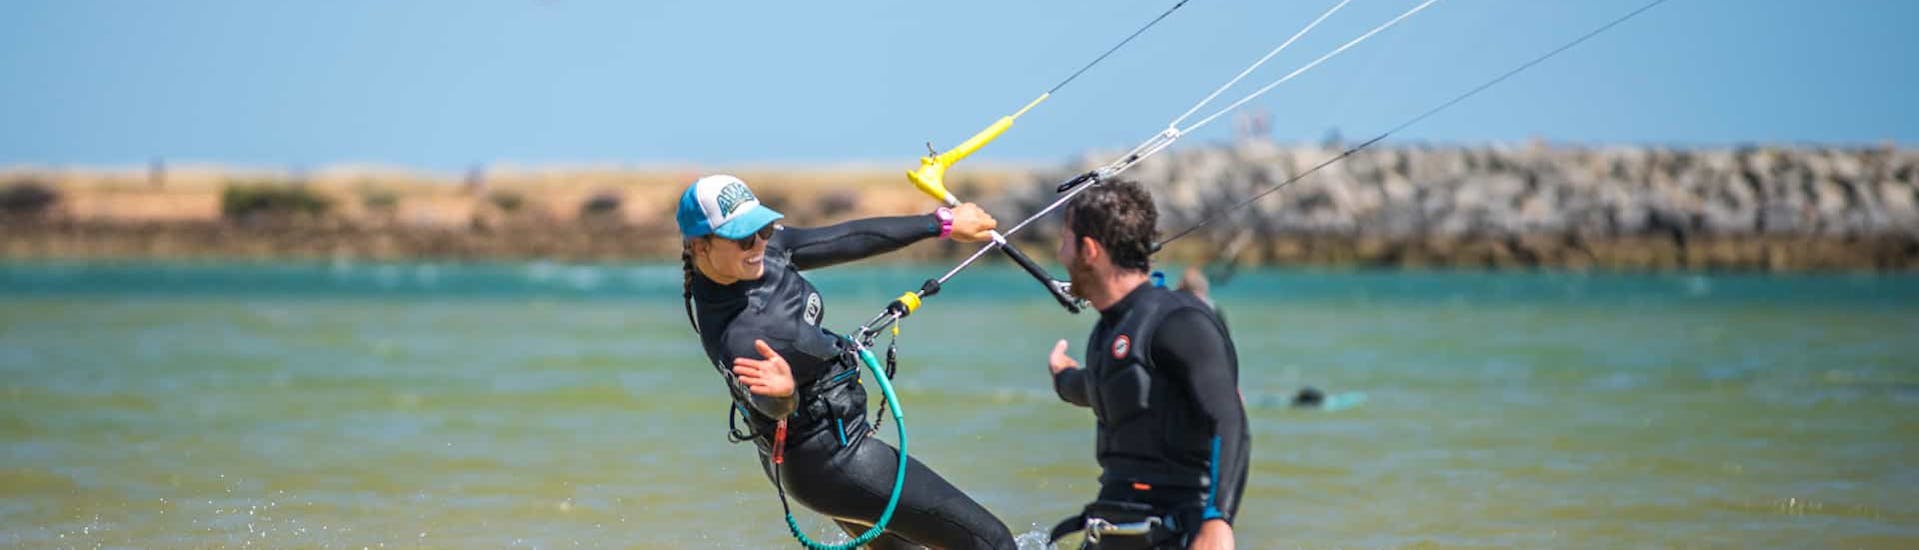 People who are participating in the private kitesurfing lessons in Lagos organized by Algarve Watersports.